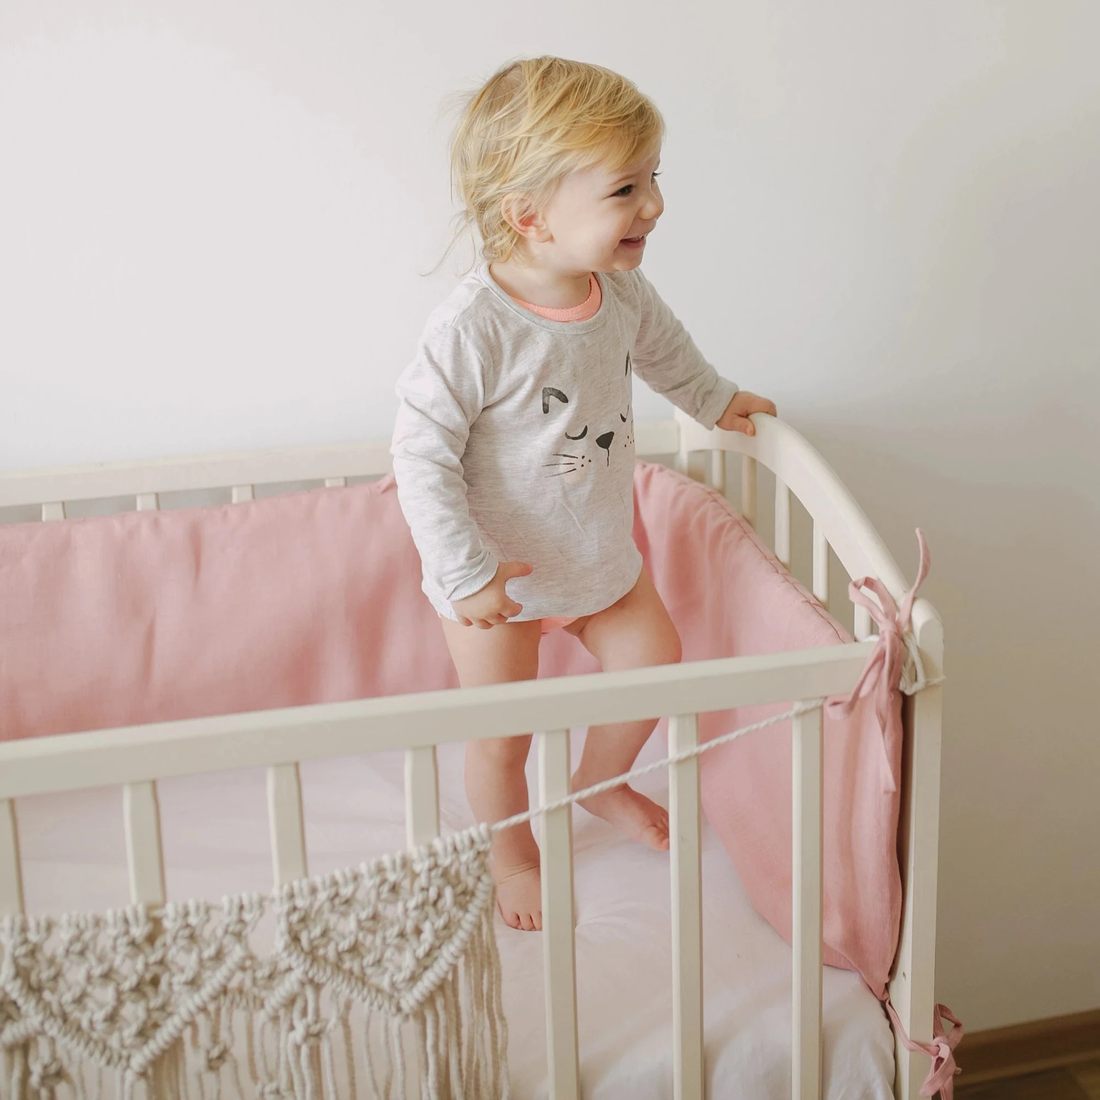 How to Wash Baby Crib Bedding and How Often?